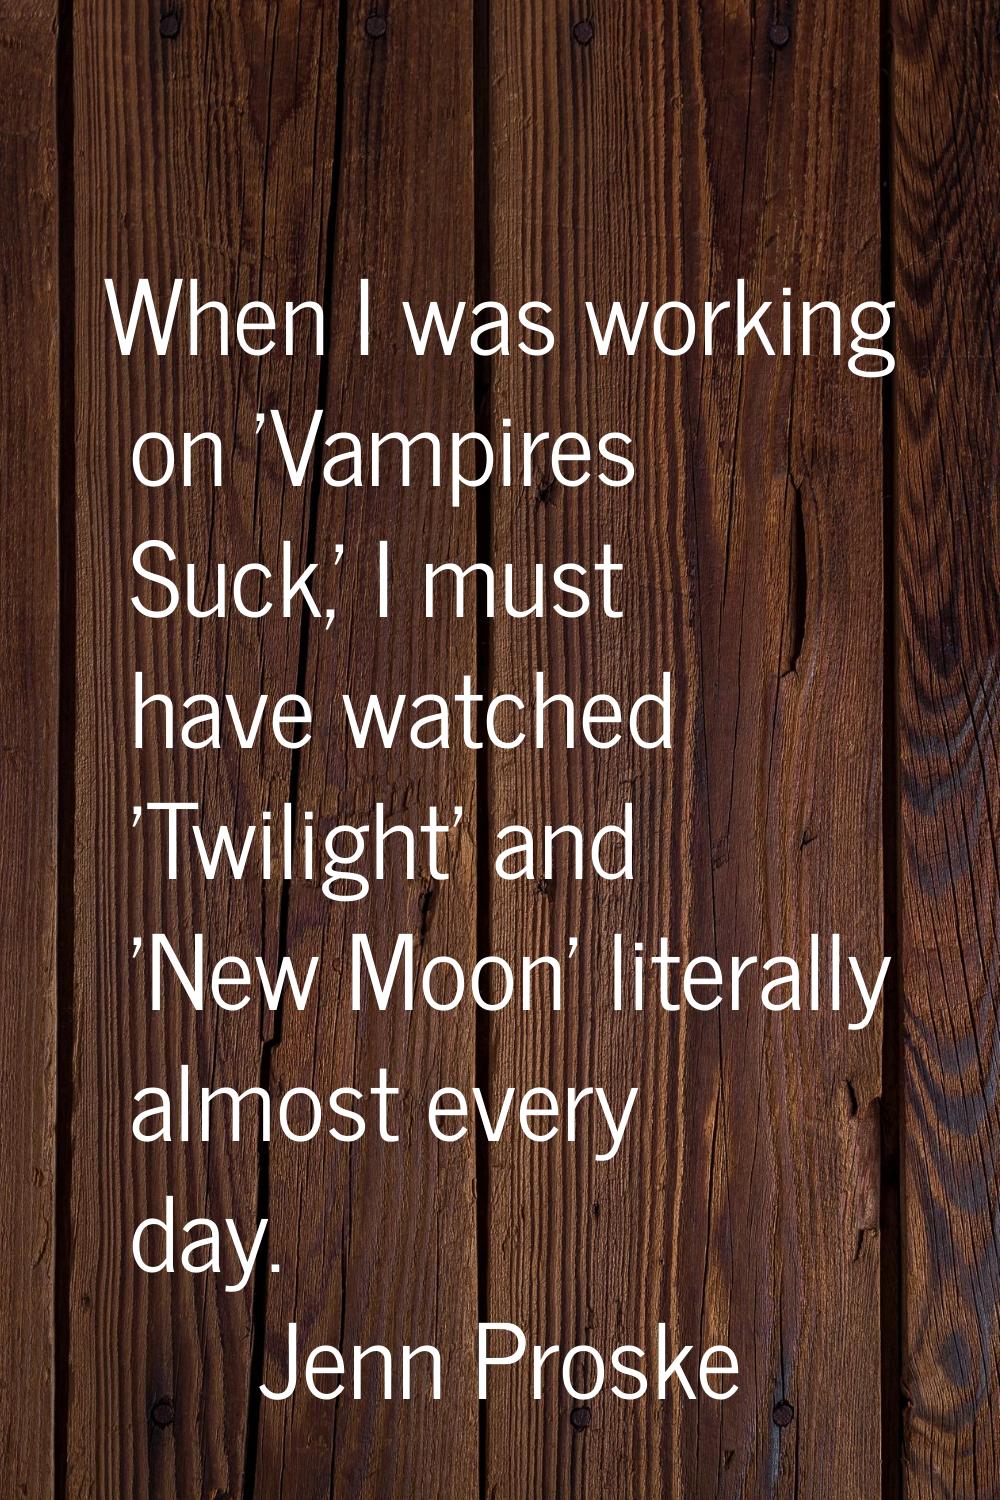 When I was working on 'Vampires Suck,' I must have watched 'Twilight' and 'New Moon' literally almo